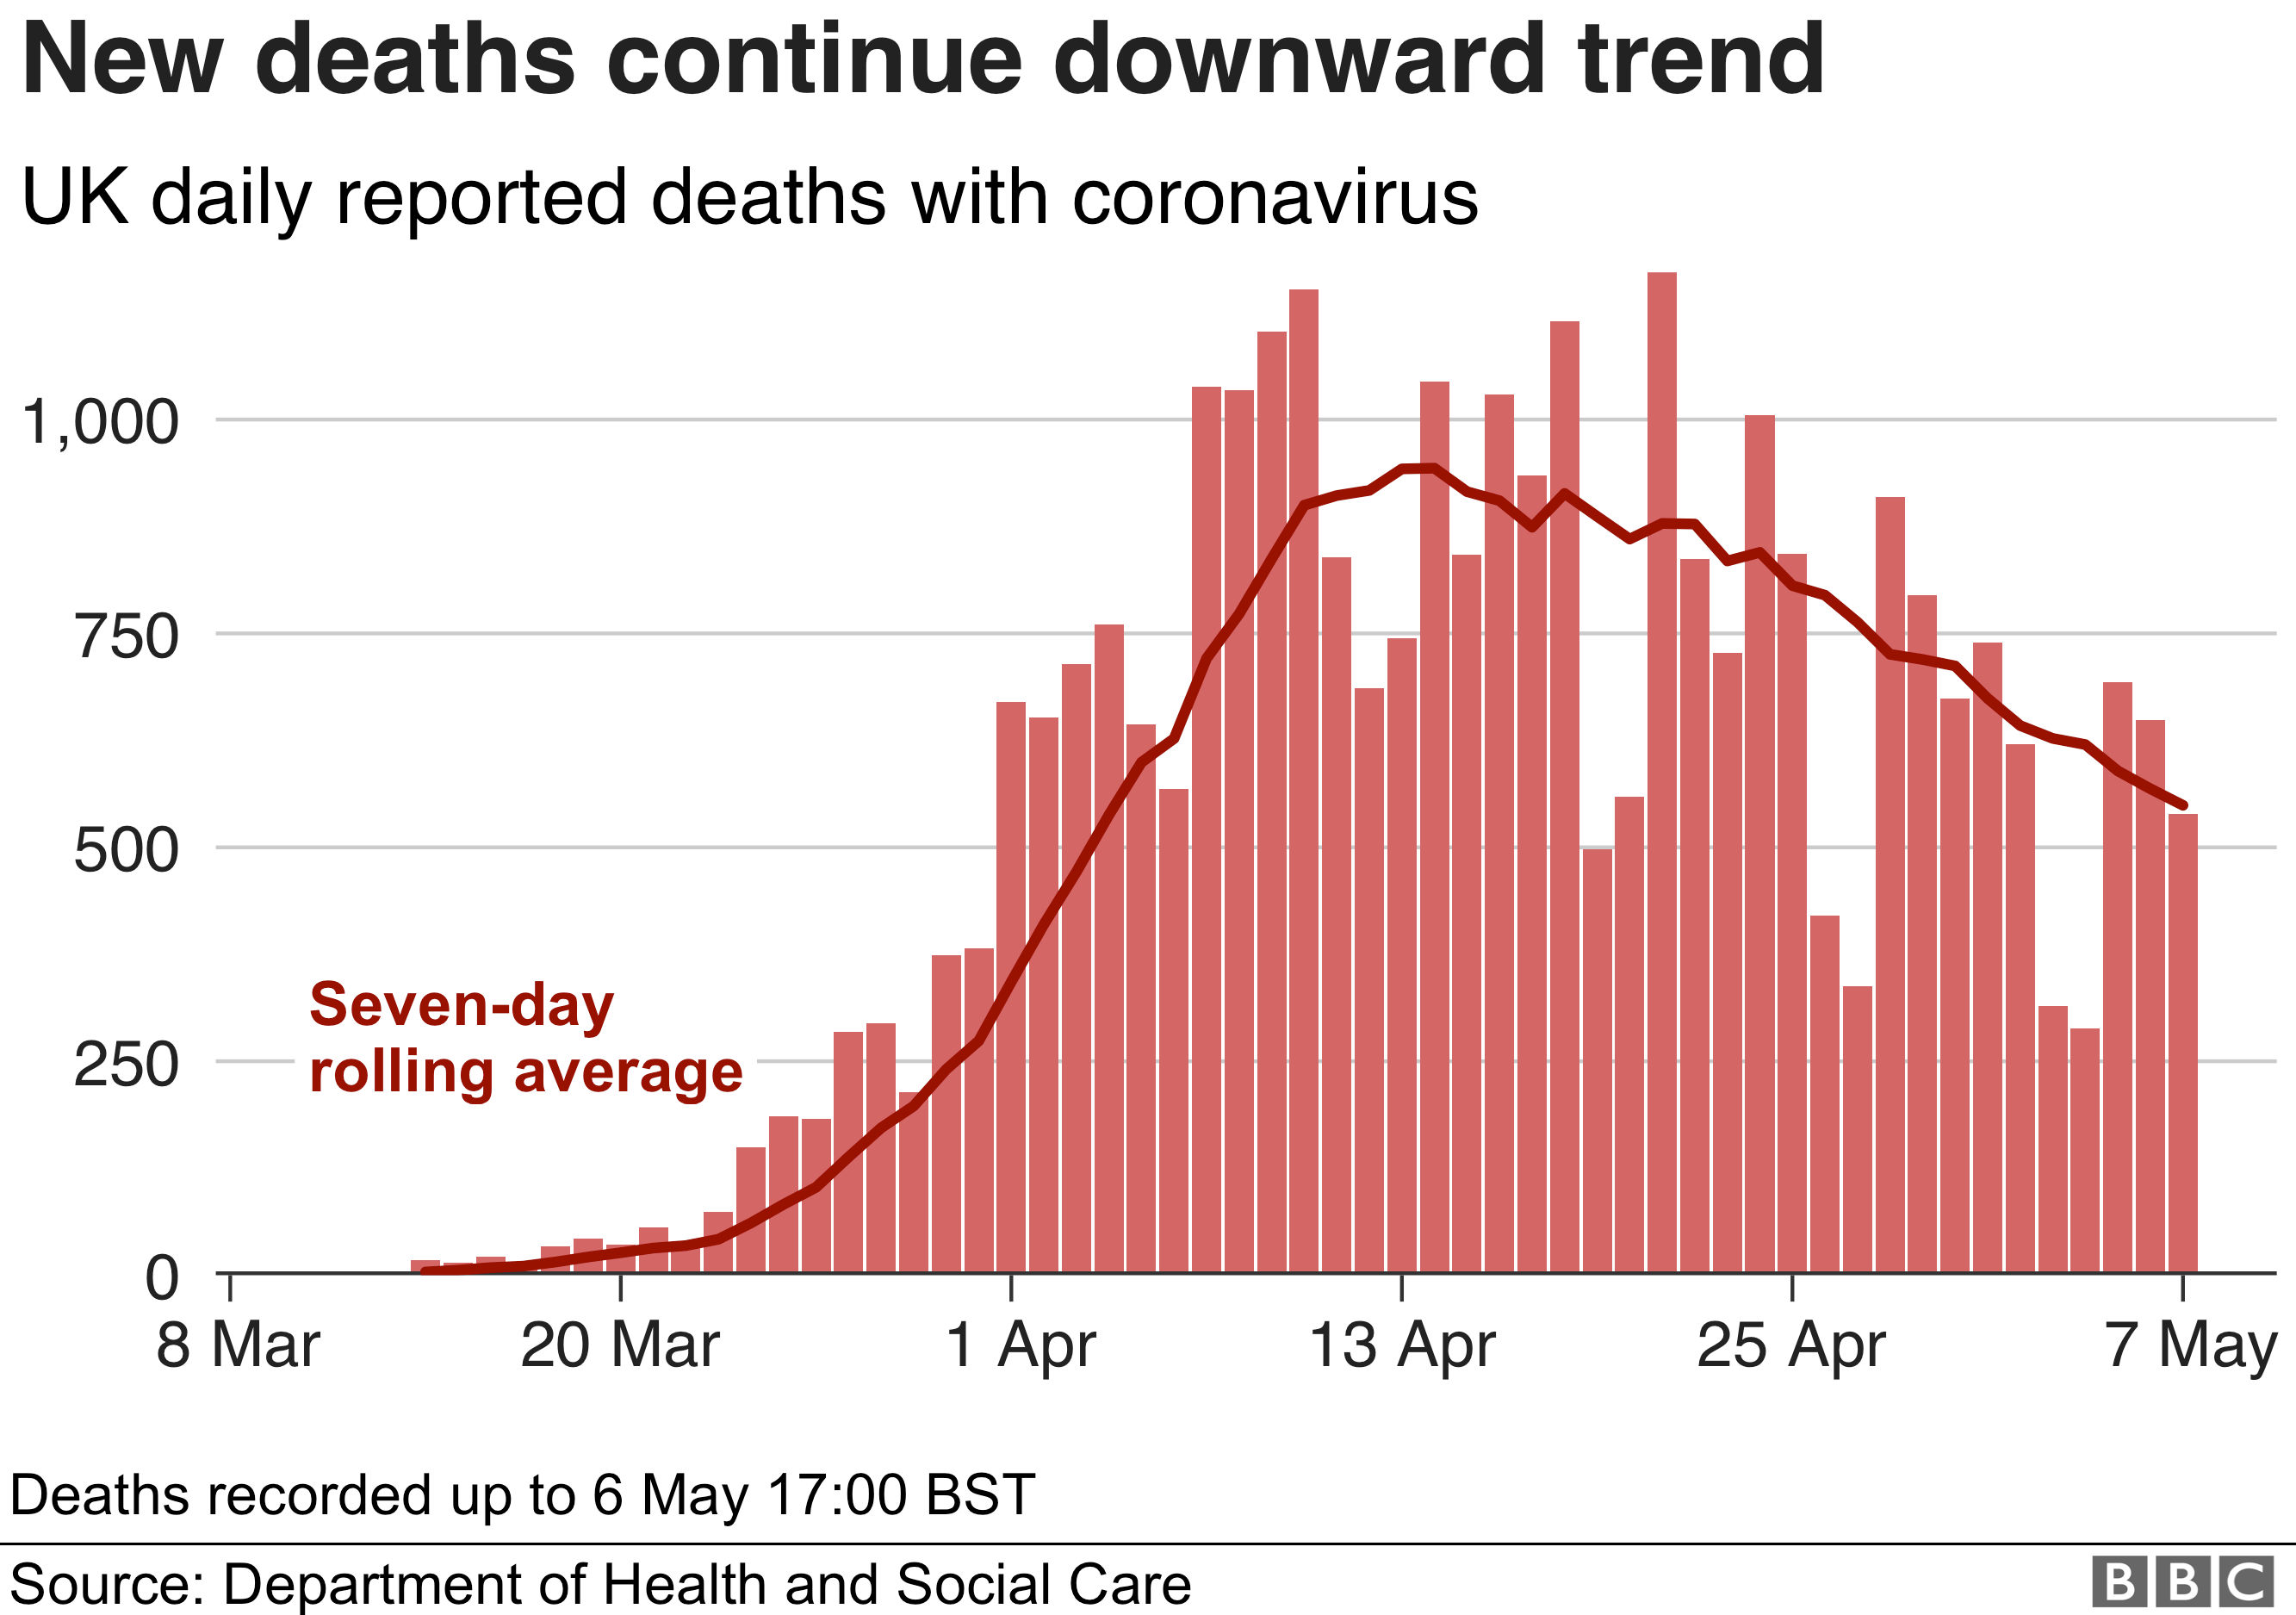 Bar chart shows daily deaths are coming down